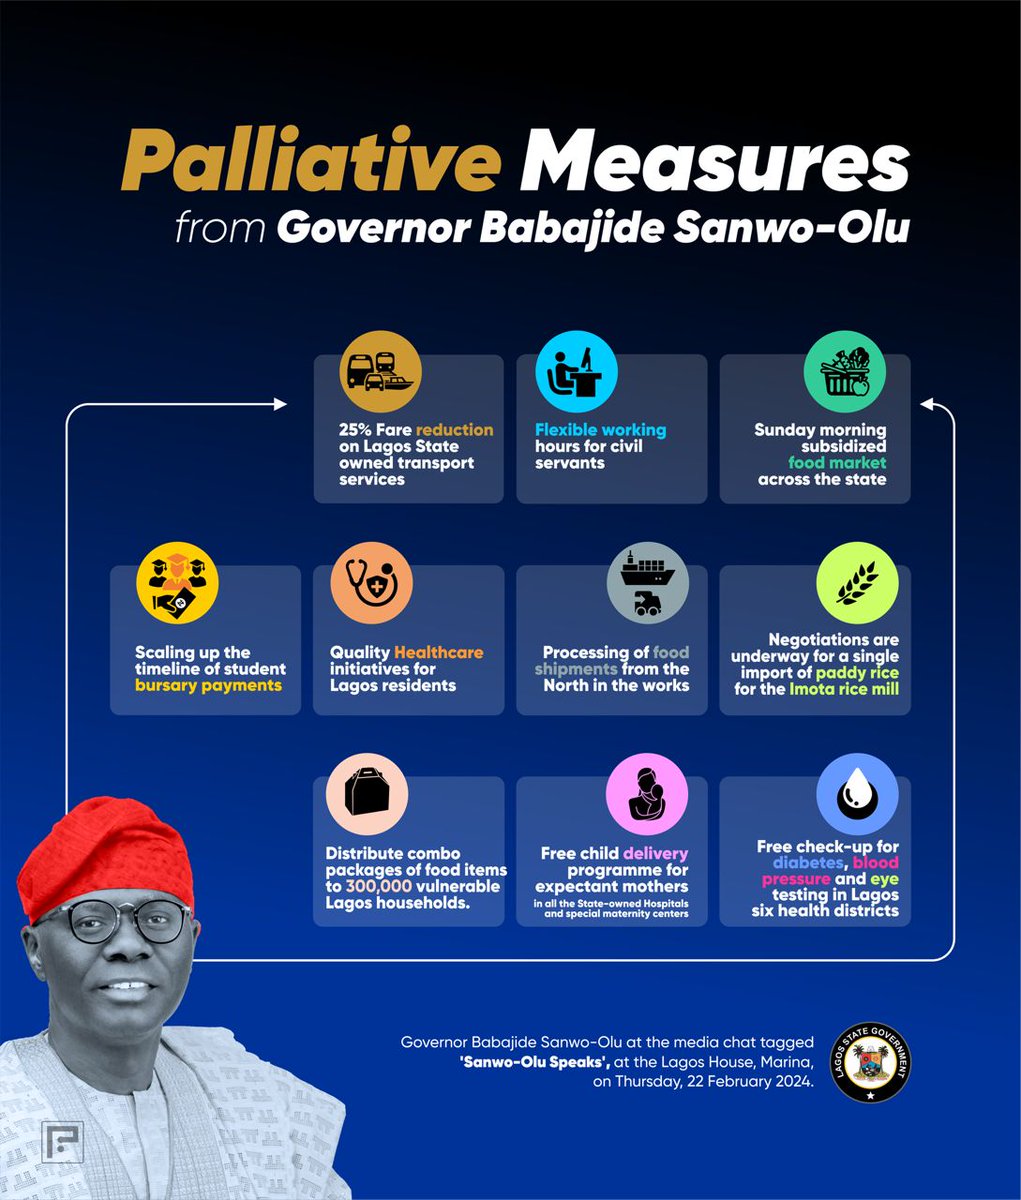 Palliative measures from Governor Babajide Sanwo-Olu

1. 25% fare reduction on Lagos State owned transport services. 

2. Flexible working hours for civil servants, teachers to get succor. 

#LagosCares #GreaterLagosRising